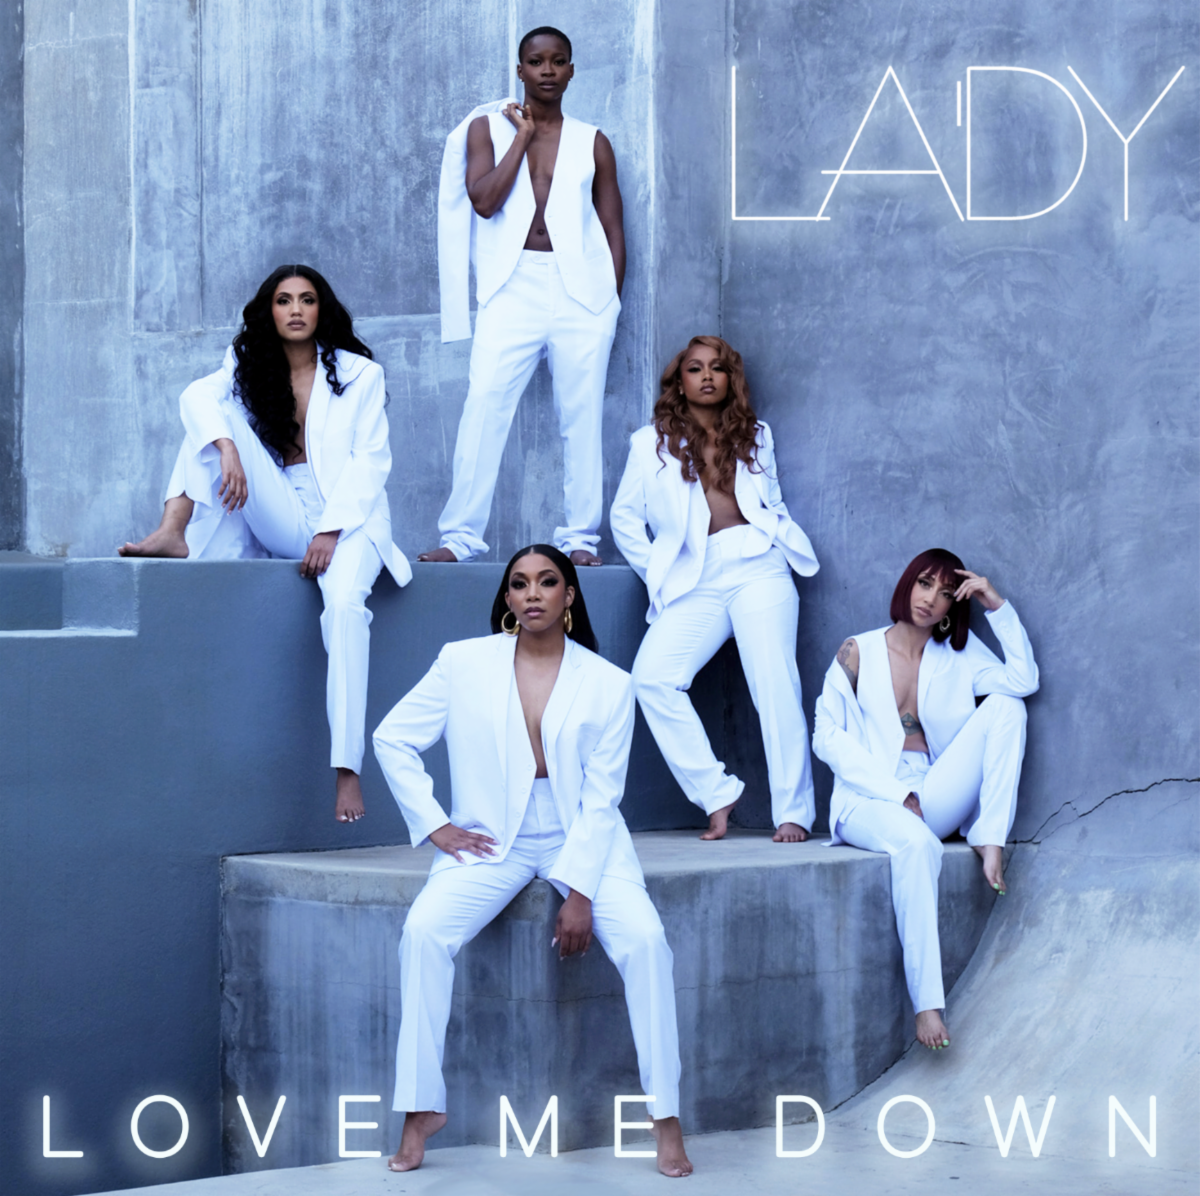 Rising All Black Girl Band LA'DY Releases Debut Single 'Love Me